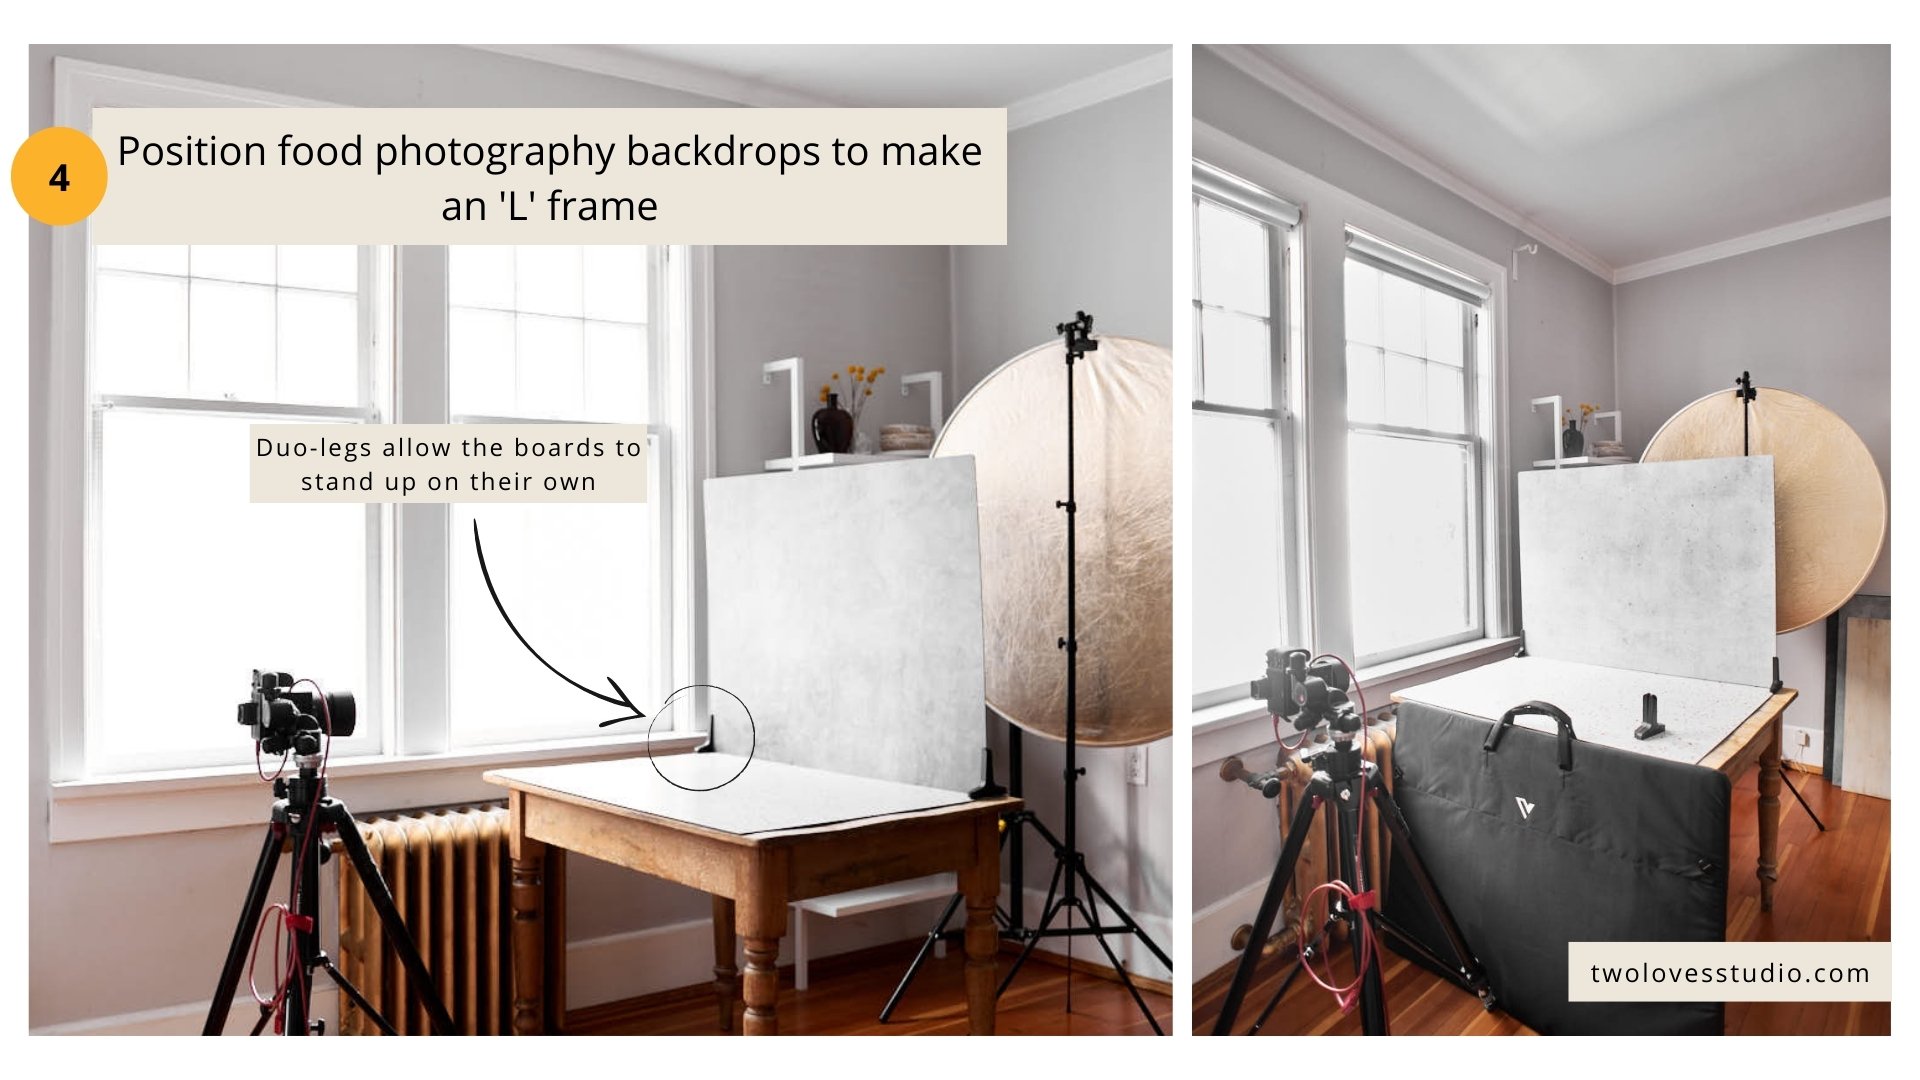 Behind the scenes of a home photography studio. With step by step instructions on how to setup a photoshoot with V Flat Duo Boards.